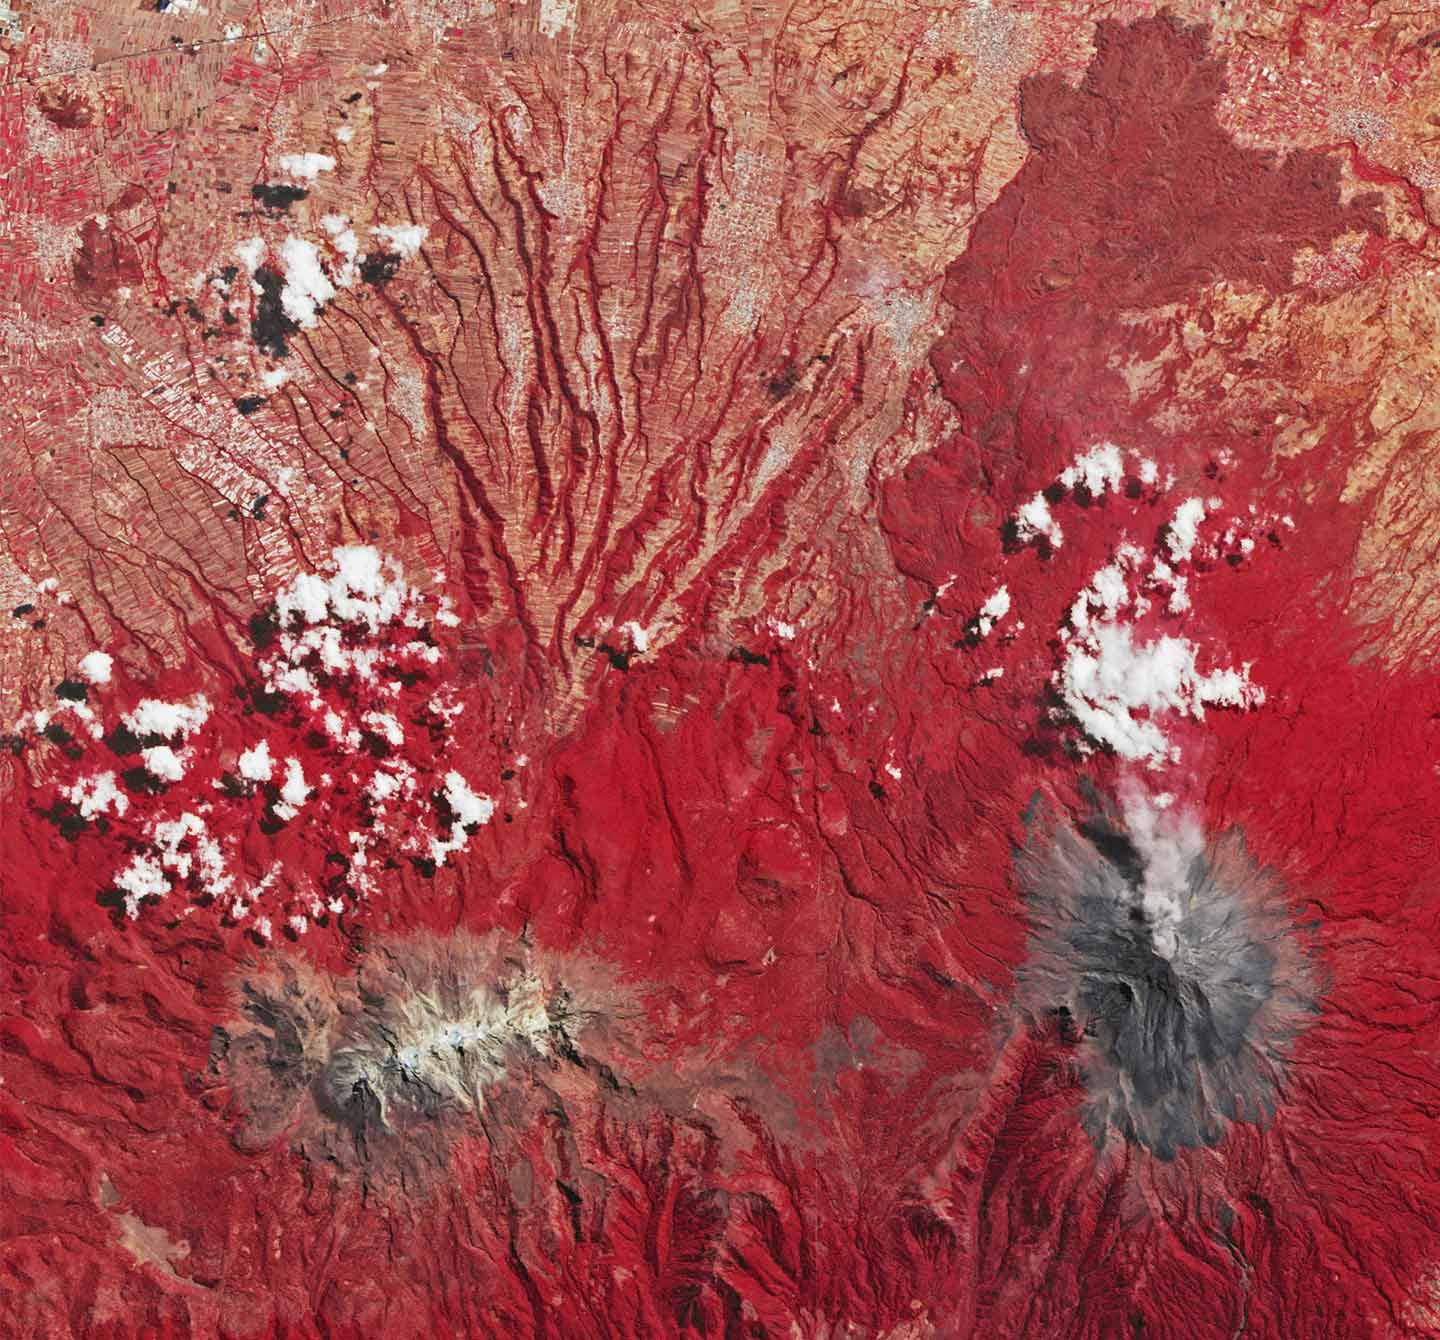 Volcanic plume venting from the summit crater of Popocatépetl. False-color image makes surrounding vegetation appear red.